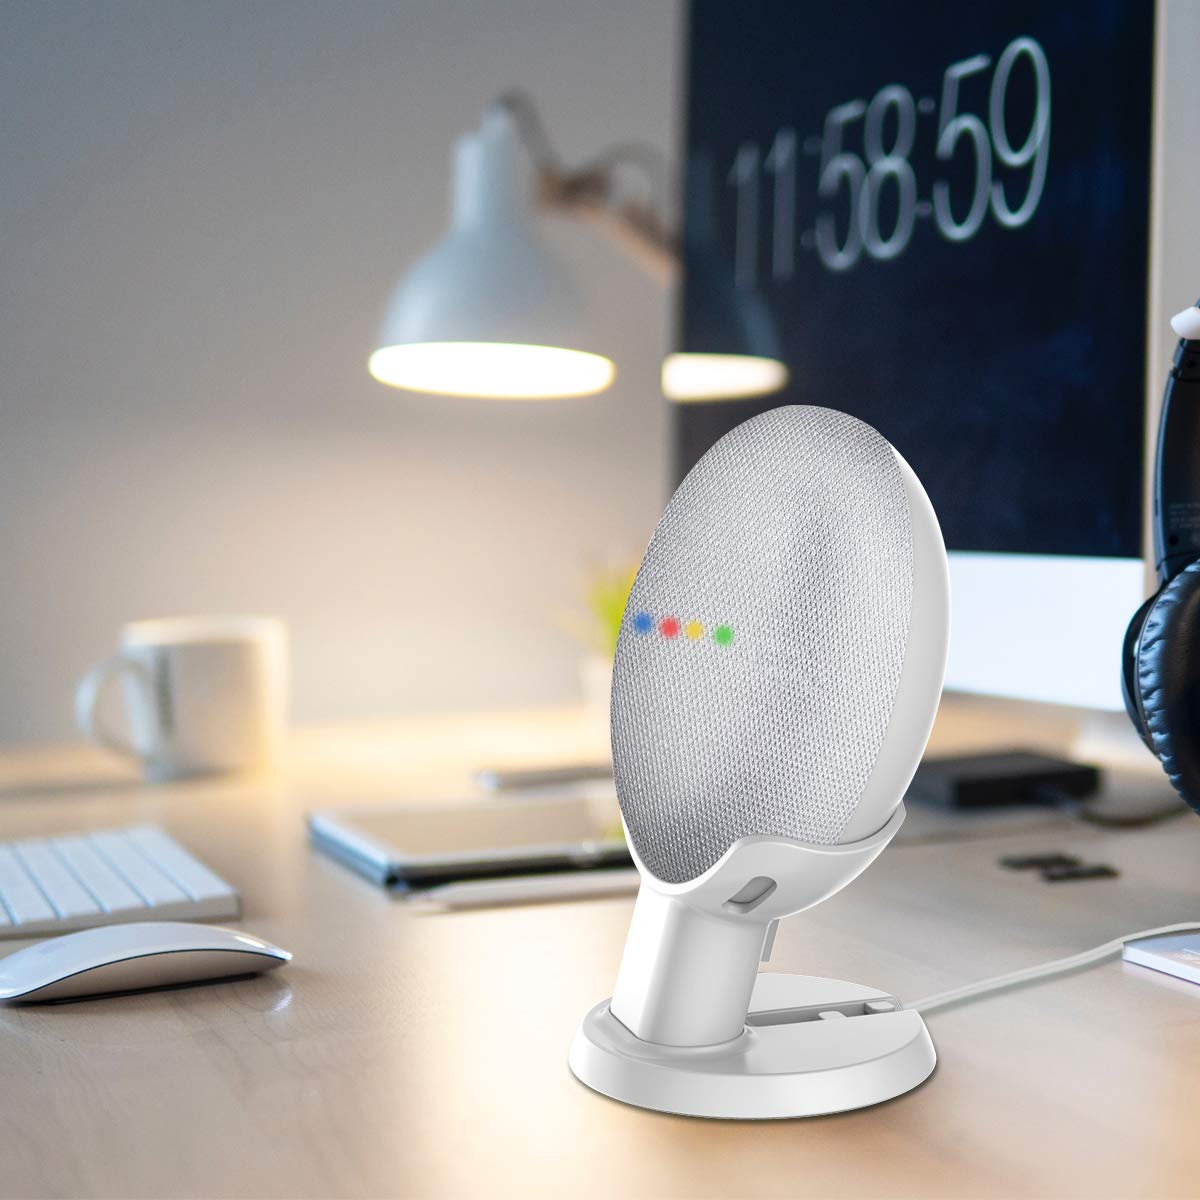 SPORTLINK Pedestal for Nest Mini (2nd Gen) and Google Home Mini (1st Generation) Improves Sound Visibility and Appearance - A Must Have Mount Holder Stand for Nest Mini (2nd Gen)/ Home Mini (2pack)